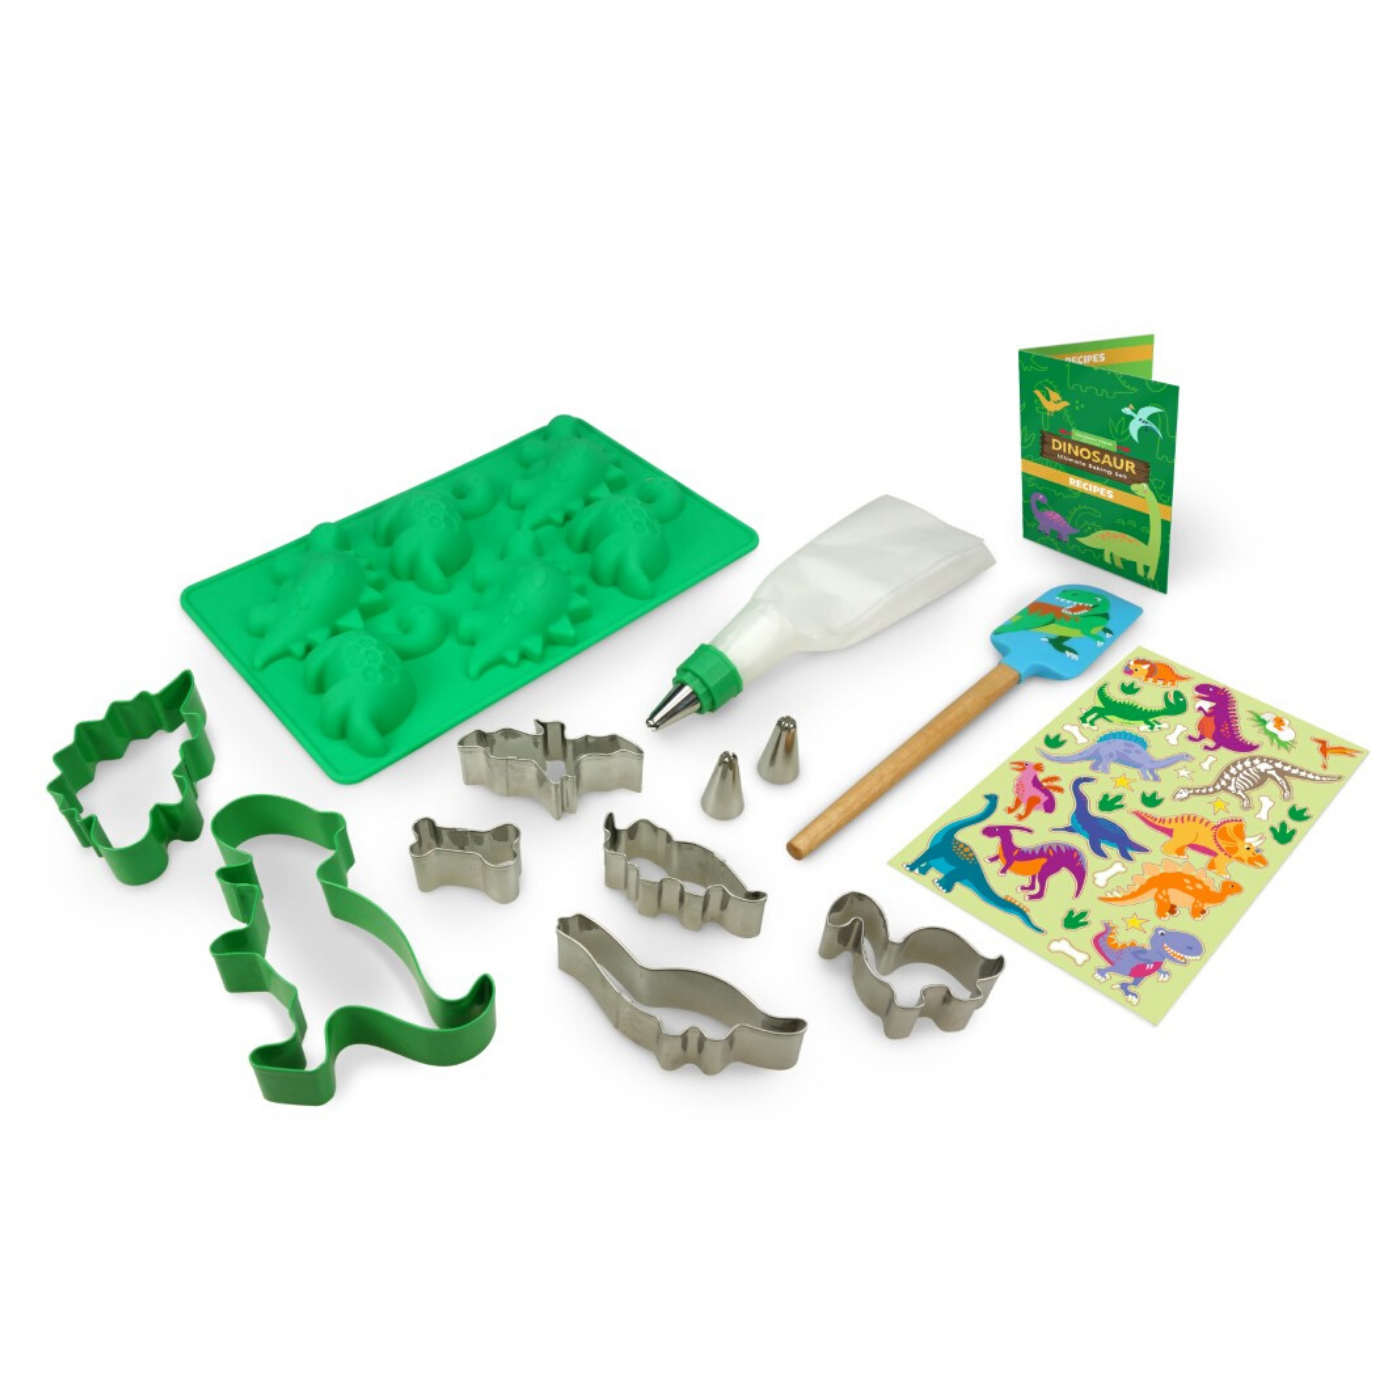 Out of box image of Dinosaur Ultimate Baking Party Set containing: : 2 large dinosaur stainless steel cookie cutters, 5 dinosaur-themed mini stainless steel cookie cutters, 1 dinosaur silicone mold,  1 silicone spatula, 1 frosting bag with coupler, ring and 3 tips, a  sticker sheet and recipes.